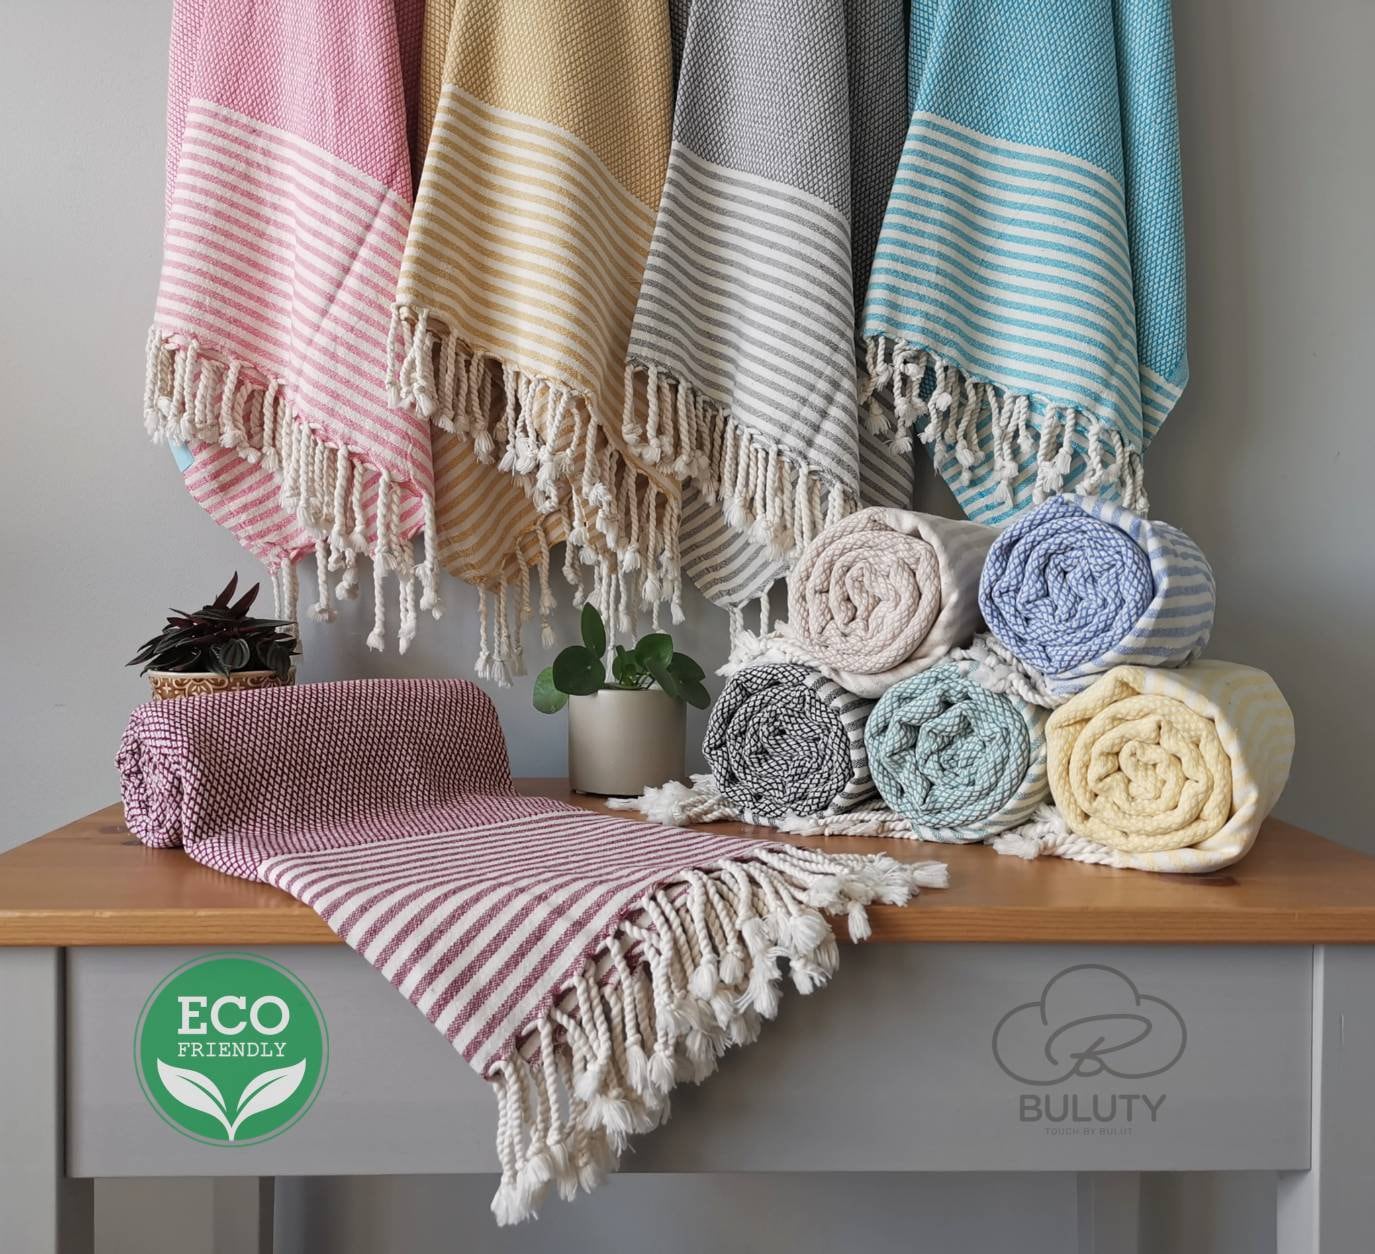 Final Clearance! Cotton Bath Towels For Adults Fast Drying Soft Water  Absorption Towels Basic Face Towels for Men Women